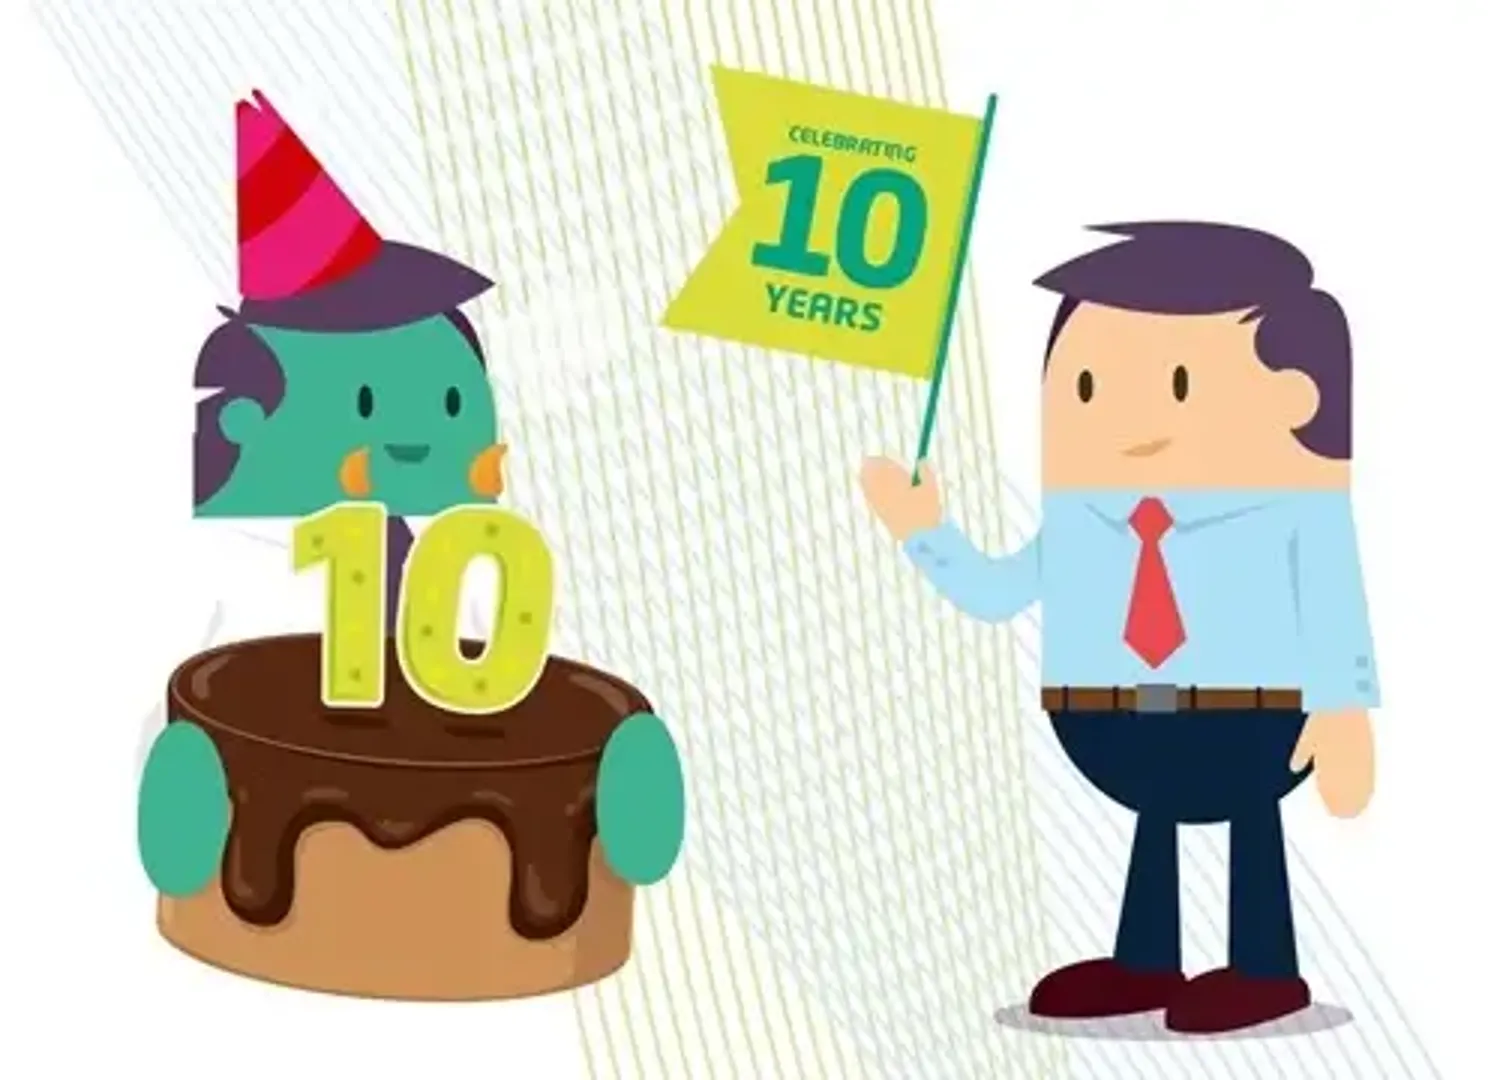 A cartoon person proudly holds a cake with the number 10 on it, ready for a celebration and another person holds a sign that says 'celebrating 10 years'